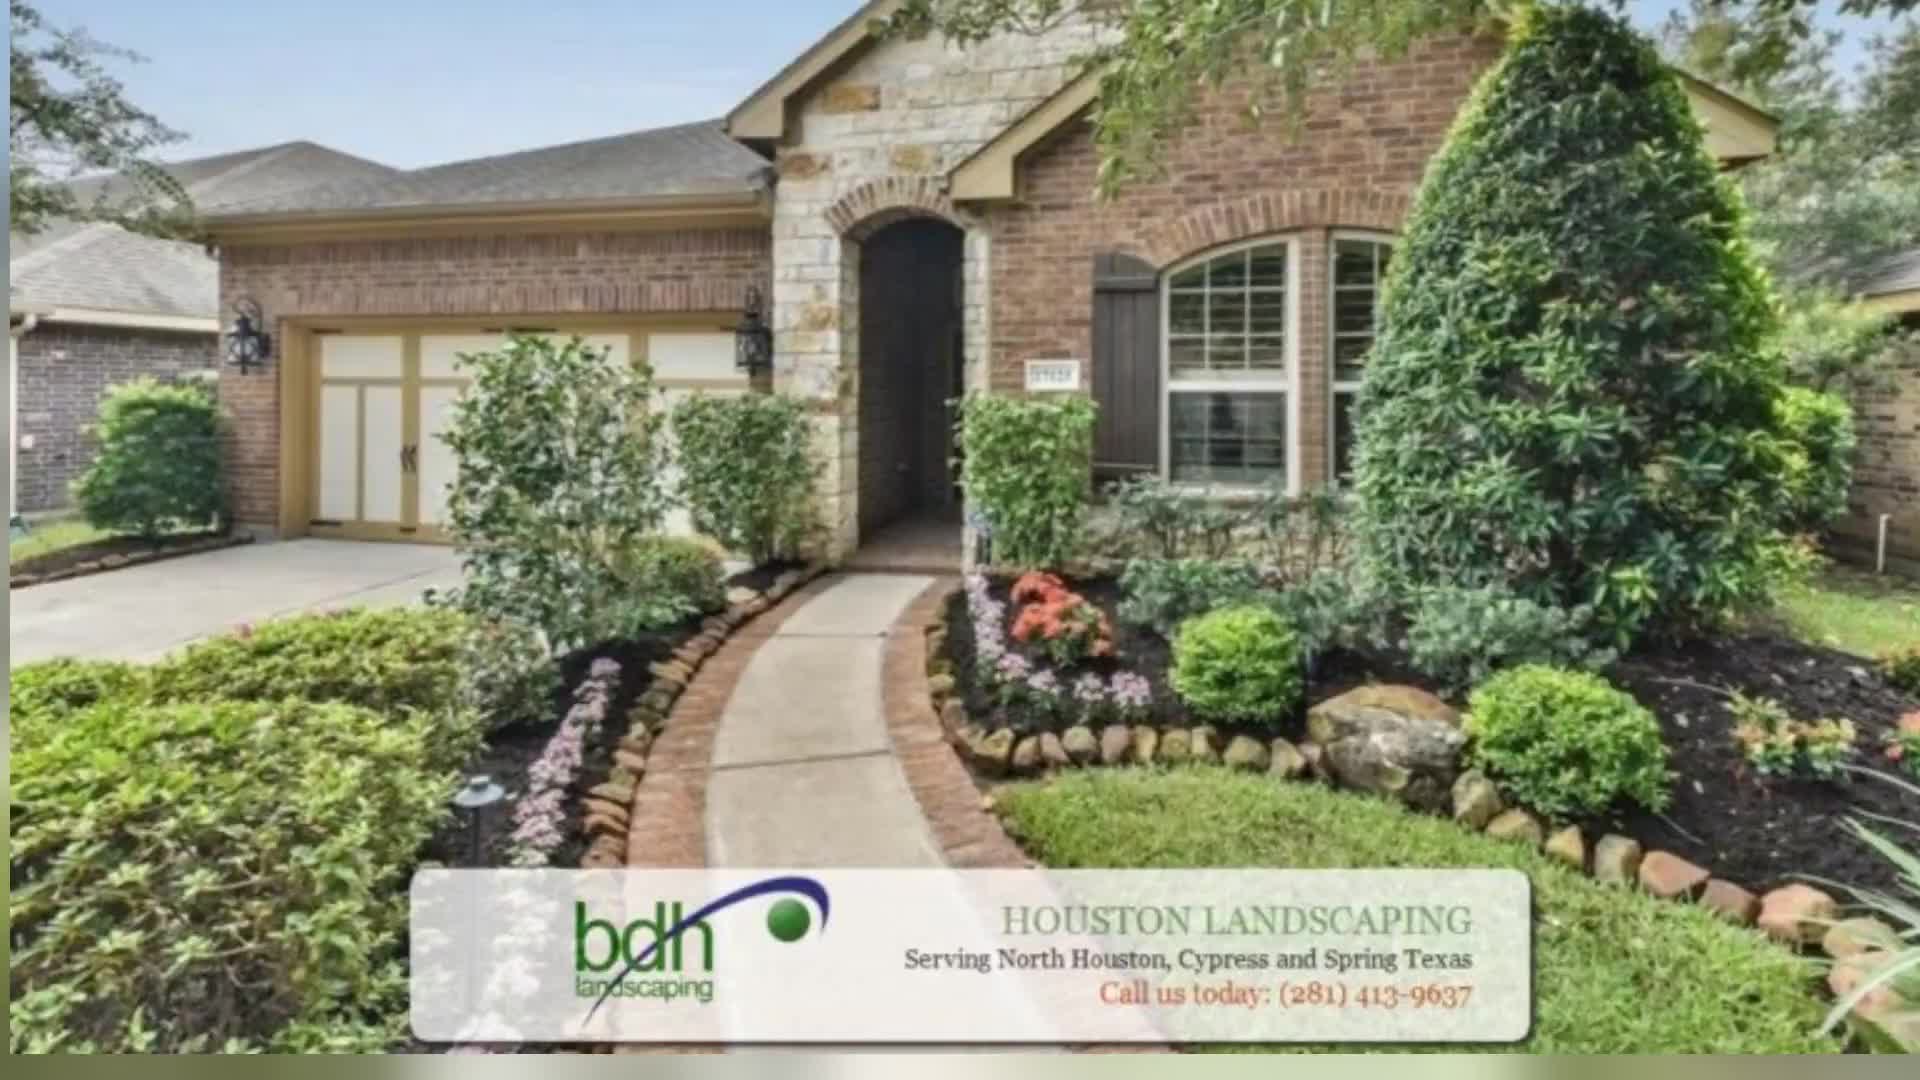 BDH Landscaping | Best Landscapers in Cypress